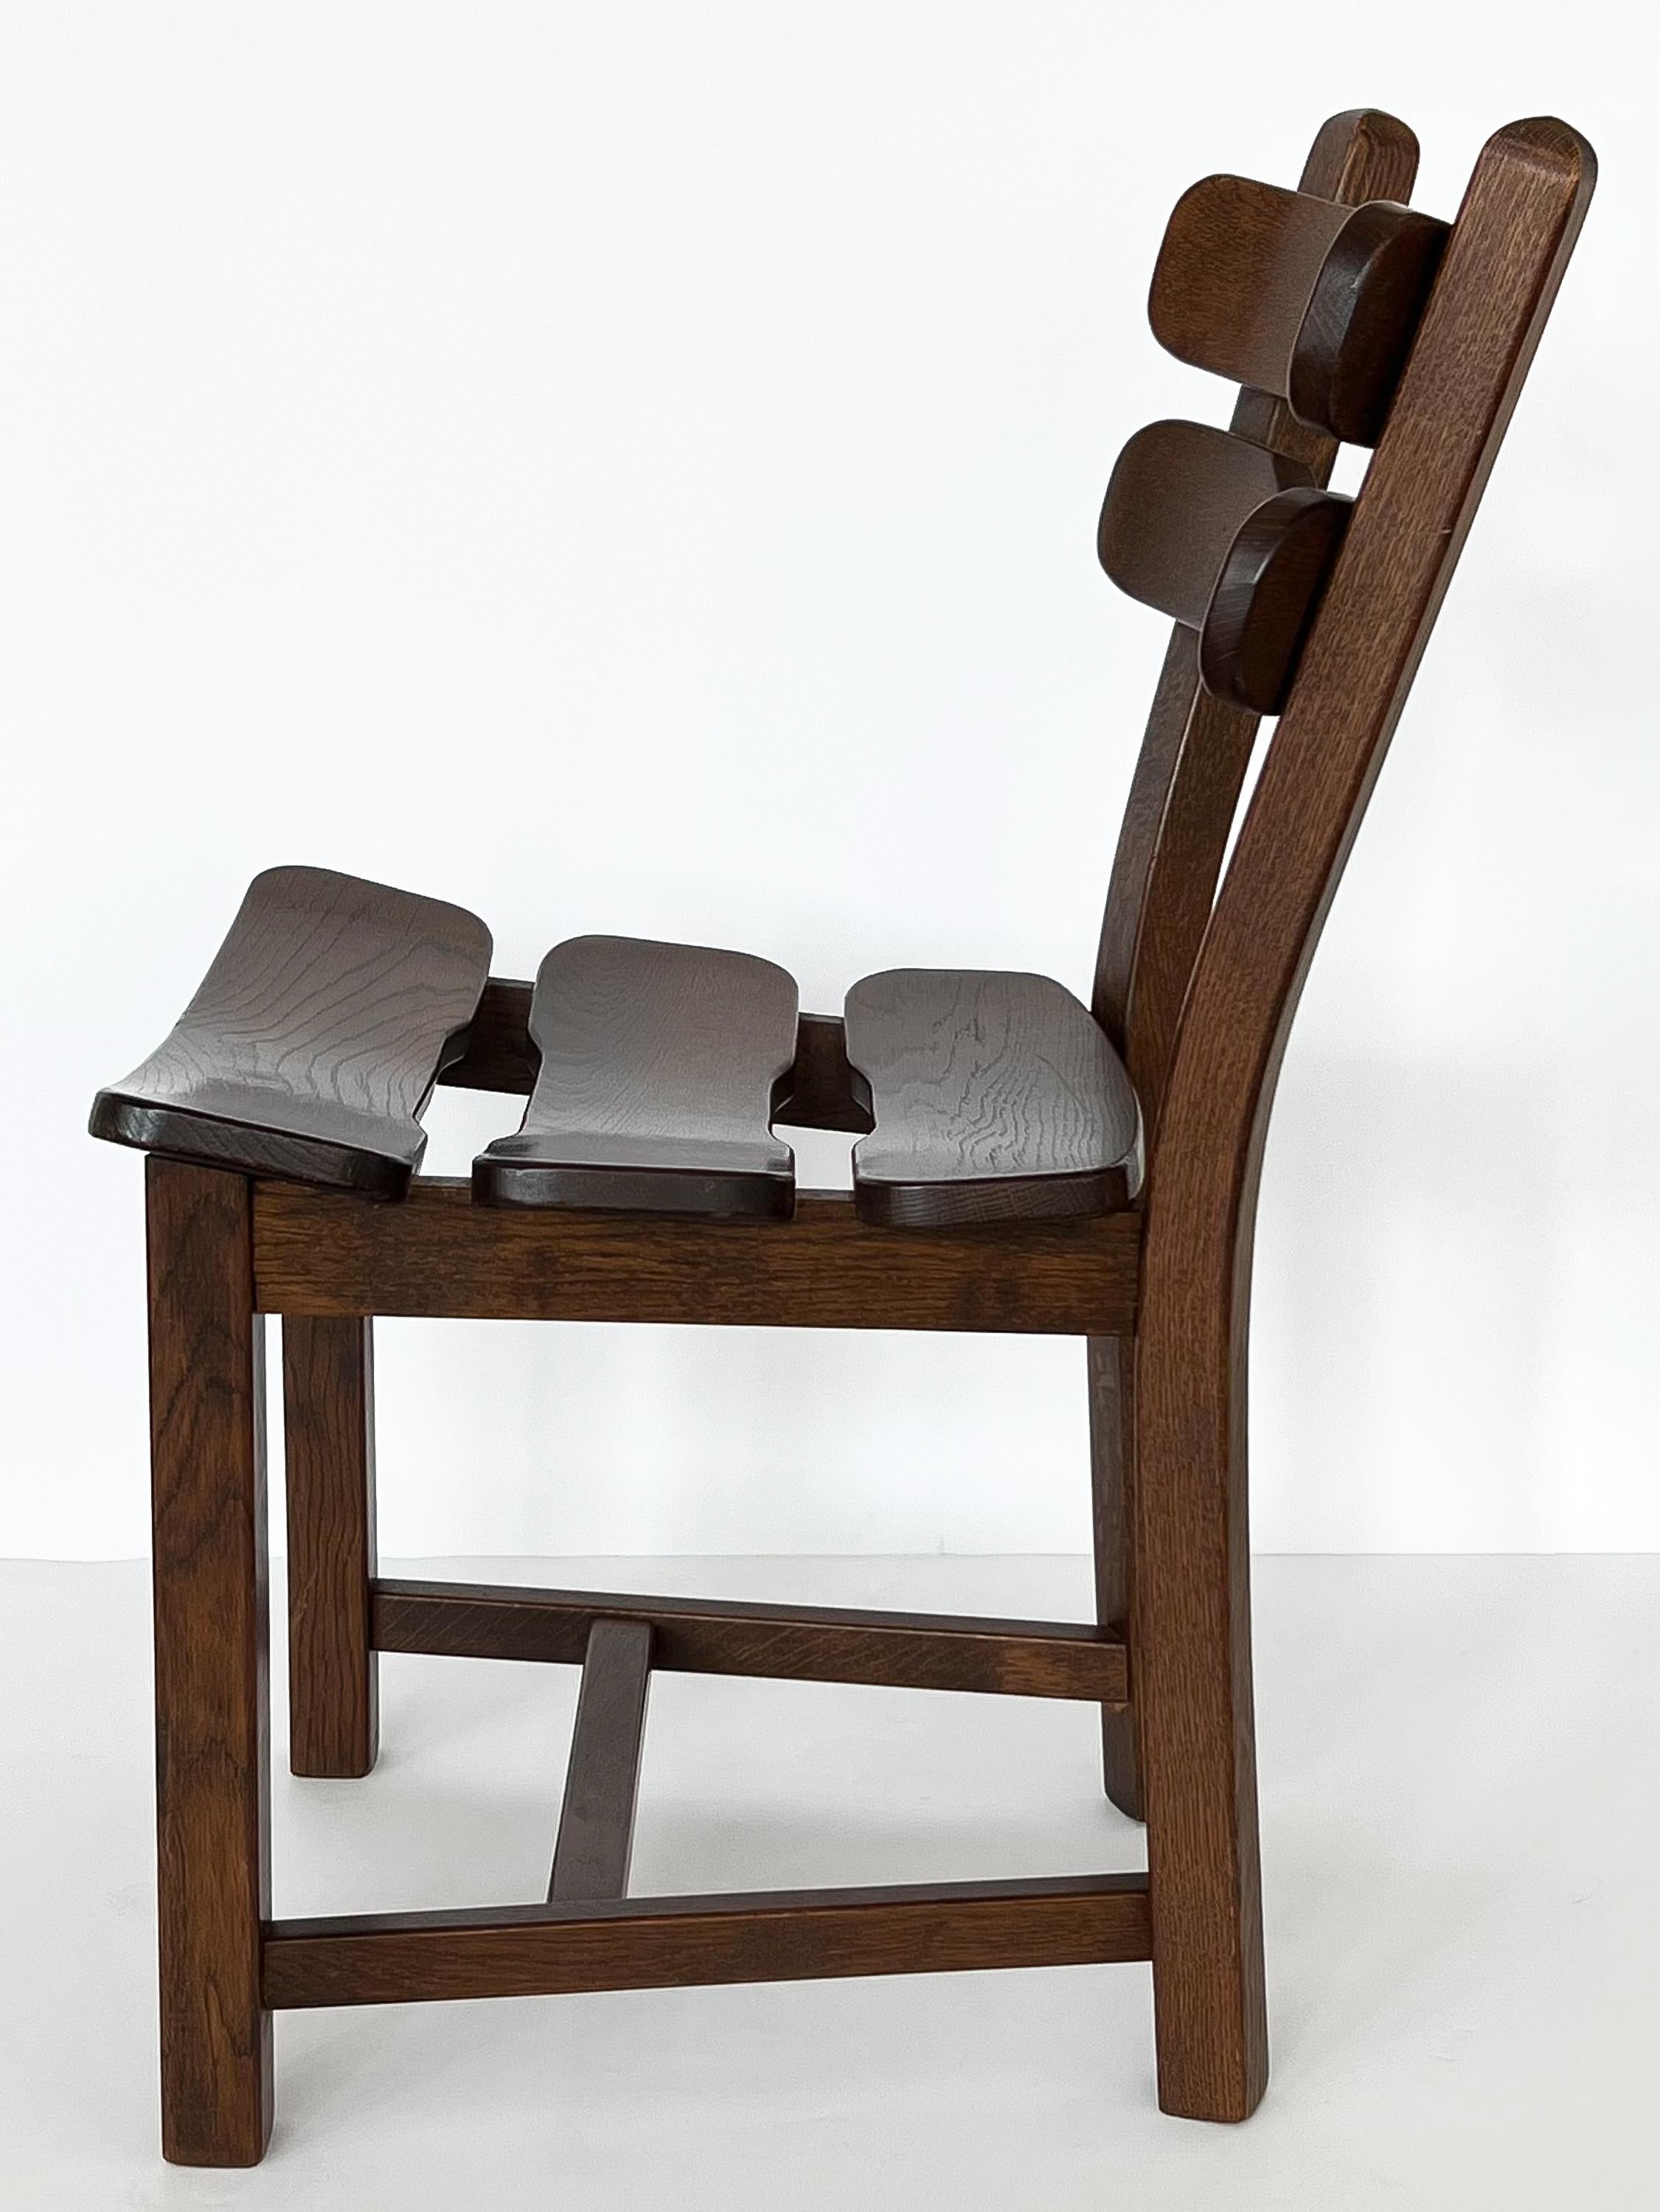 Stained Set 4 Brutalist Oak Dining Chairs by Dittmann & Co for Awa Radbound